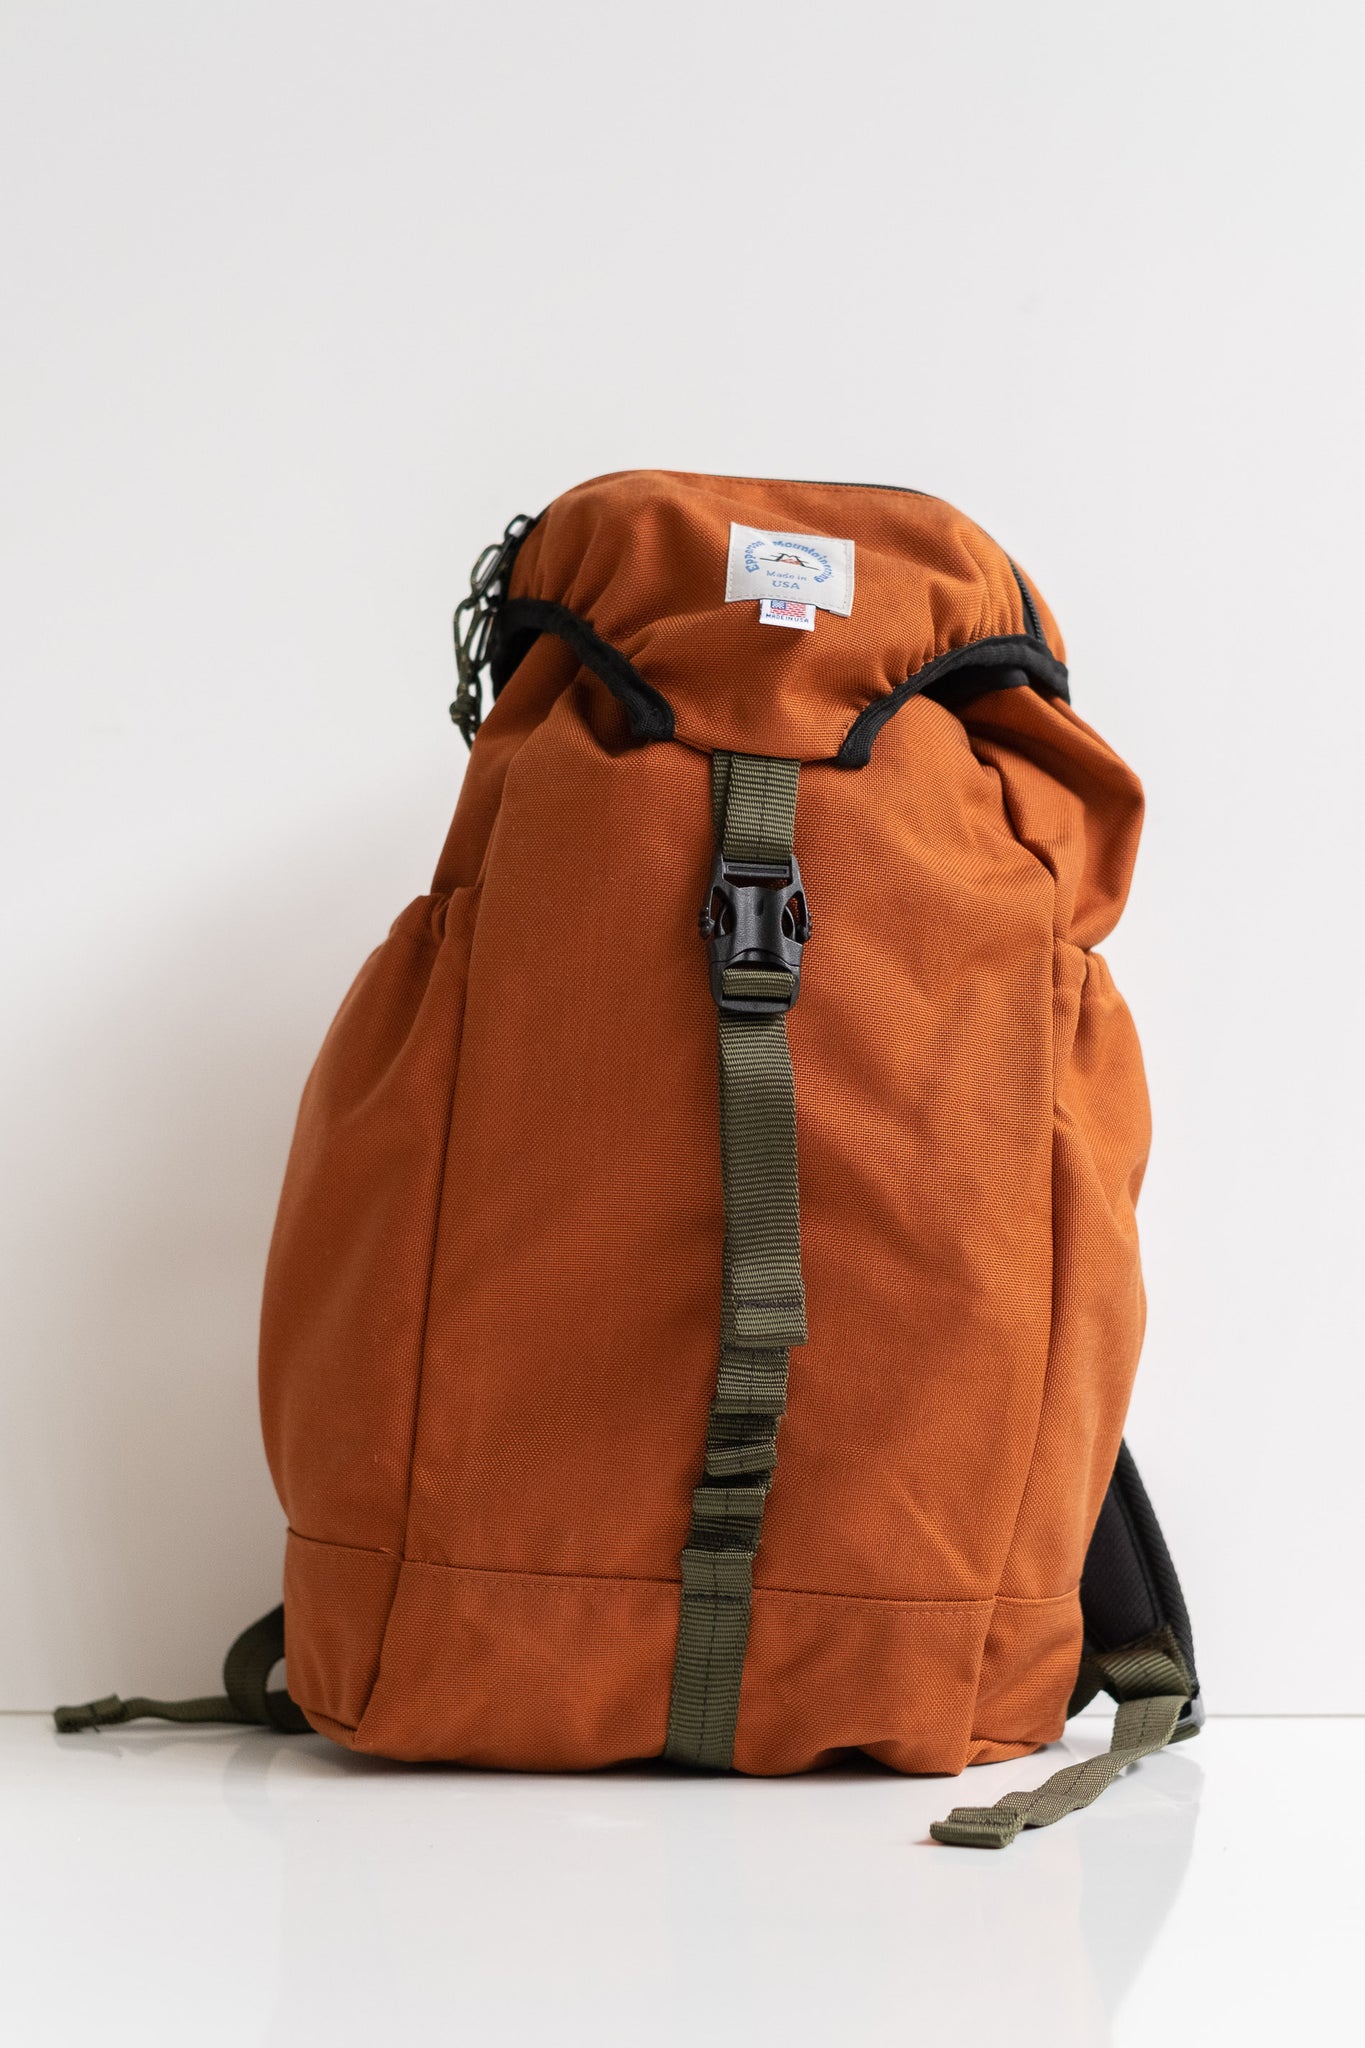 understory-shop - EPPERSON MOUNTAINEERING - SMALL CLIMB PACK